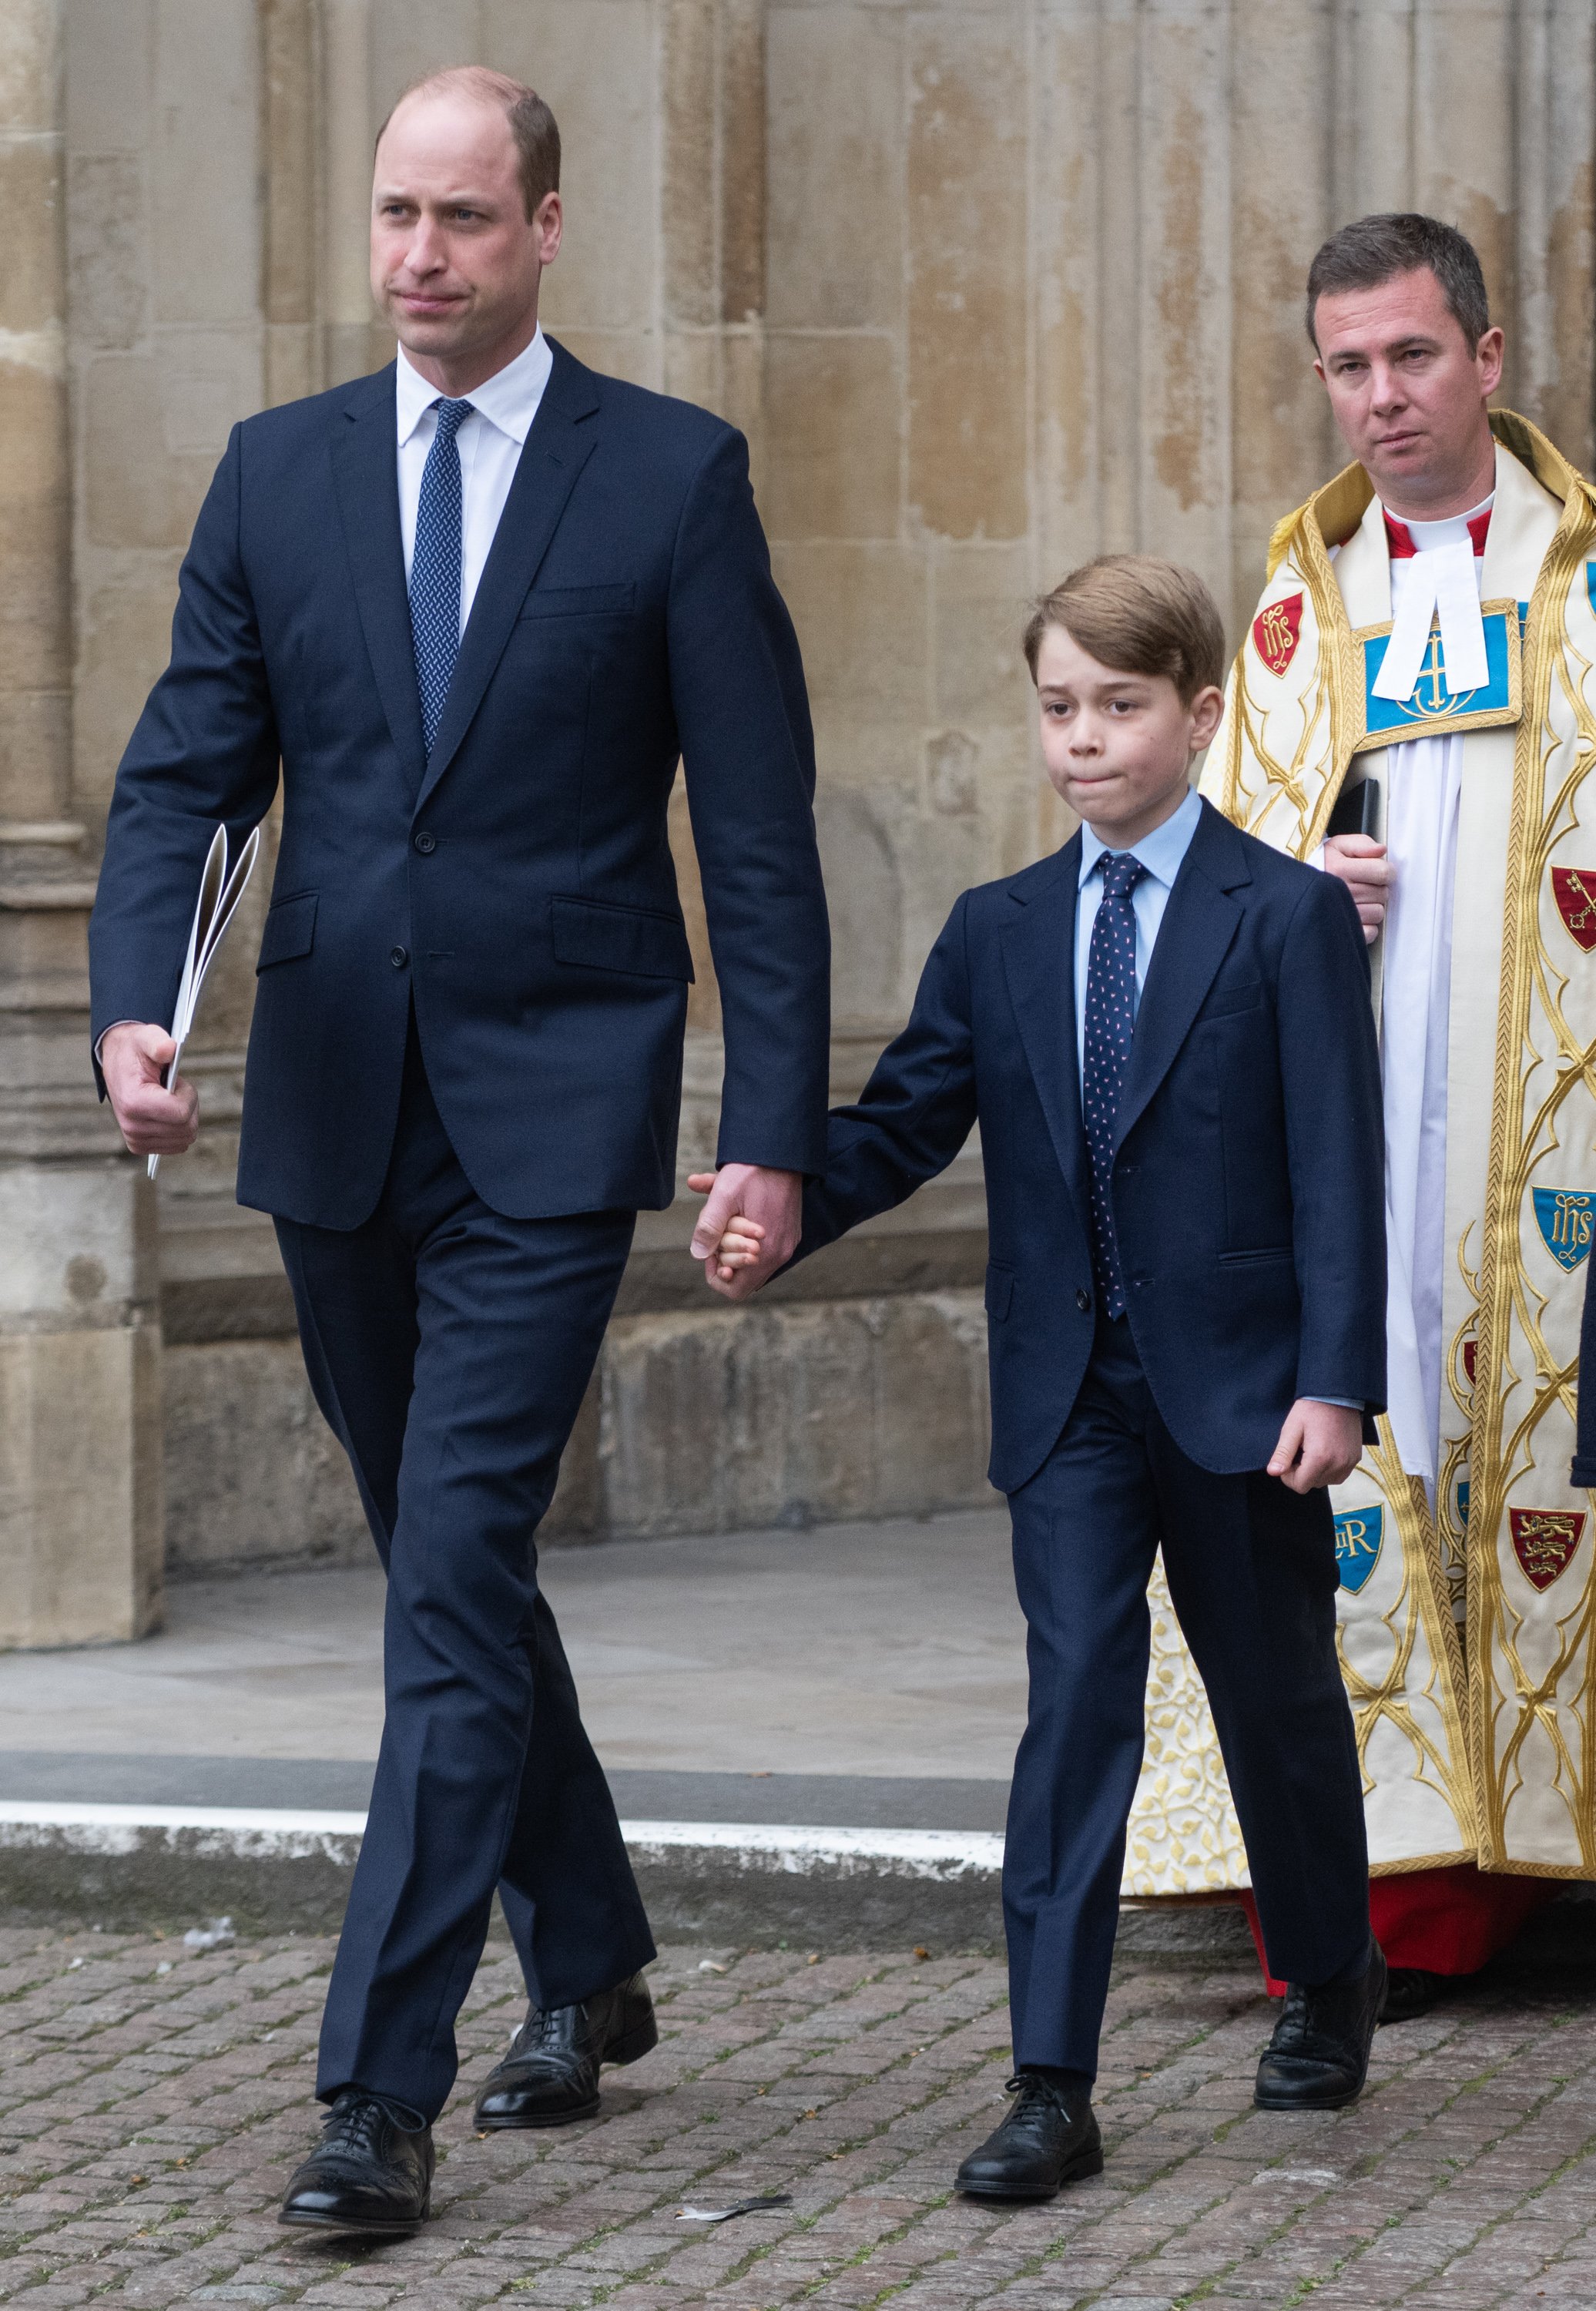 Prince William with his son Prince George photographed leaving the memorial service for Prince Philip at Westminster Abbey on March 29, 2022 in London, England. / Source: Getty Images